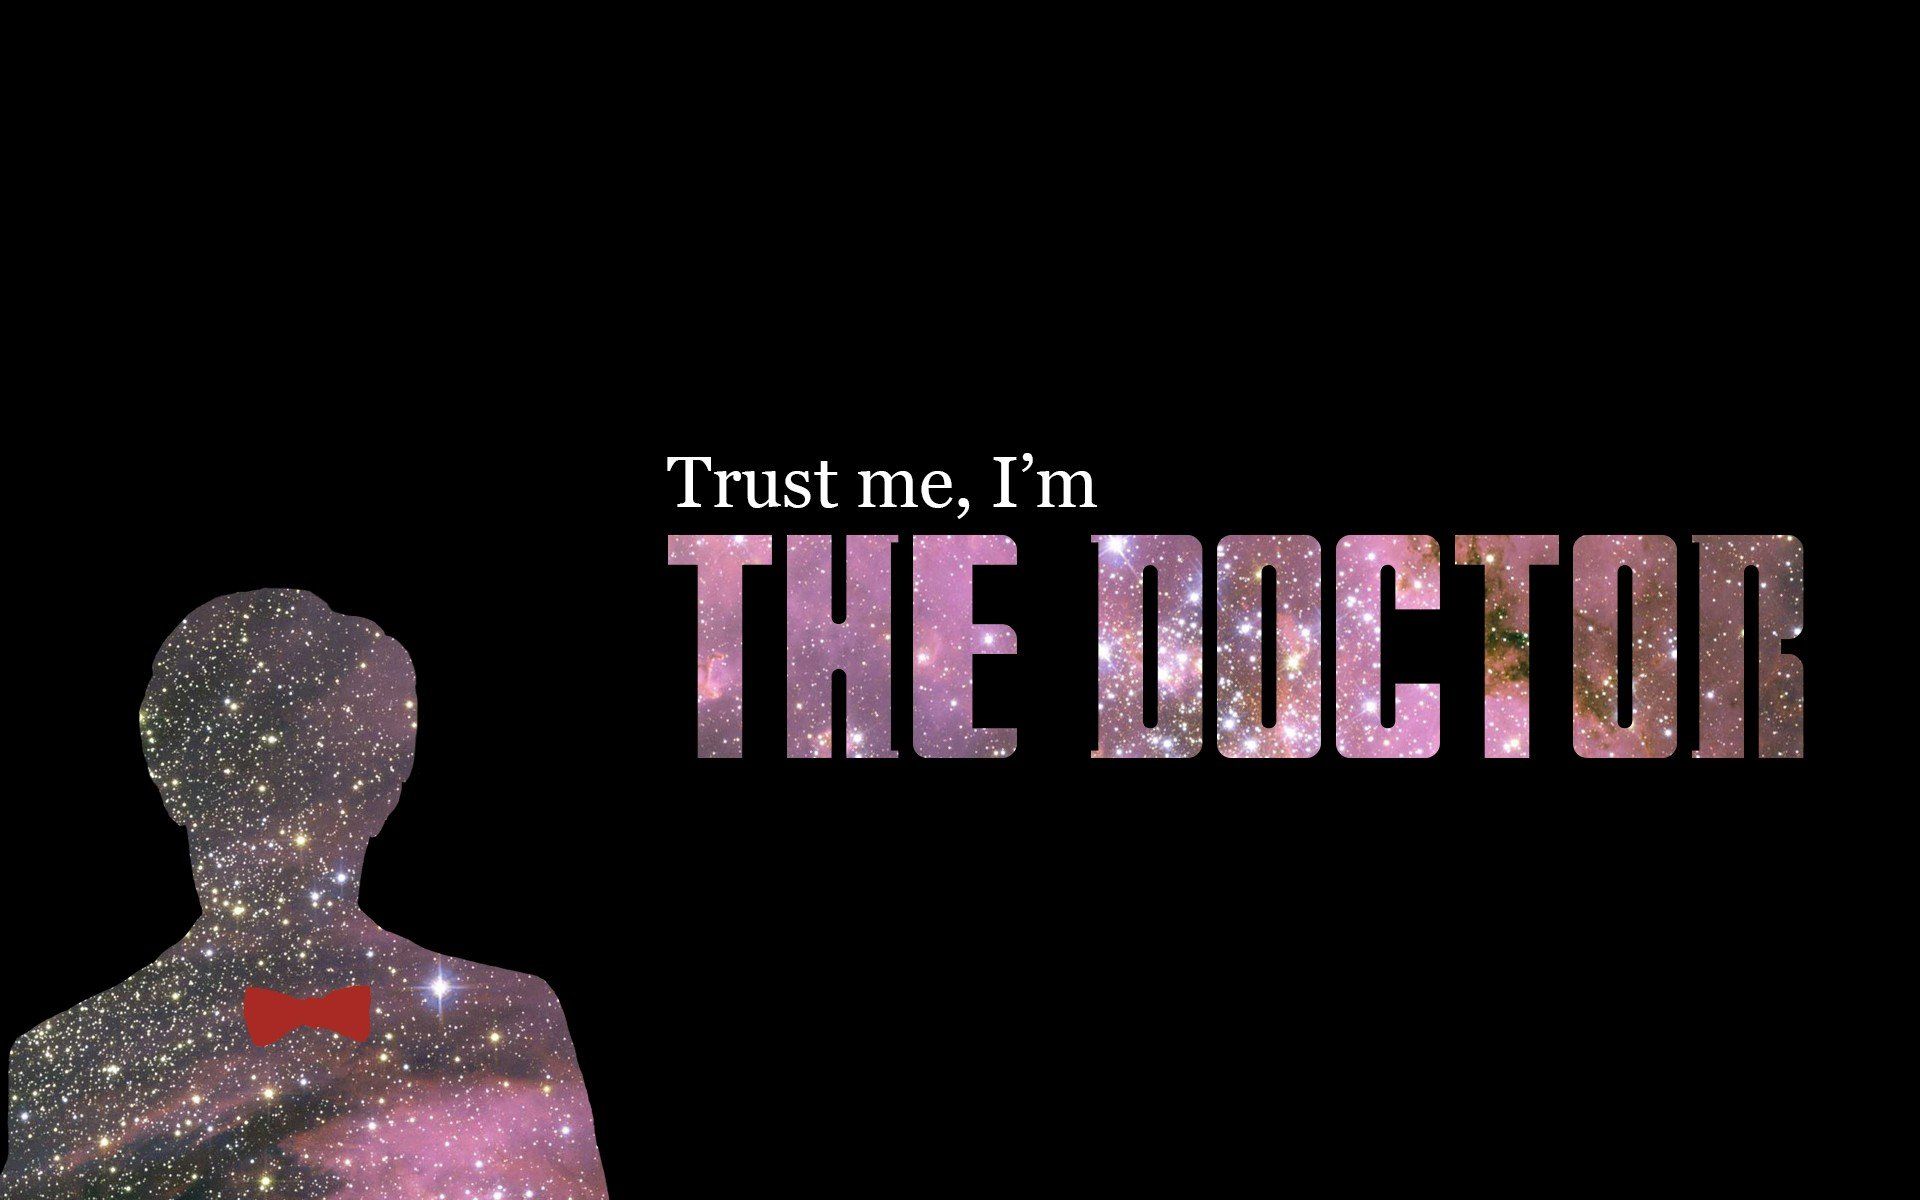 Typography Eleventh Doctor Doctor Who wallpaperx1200